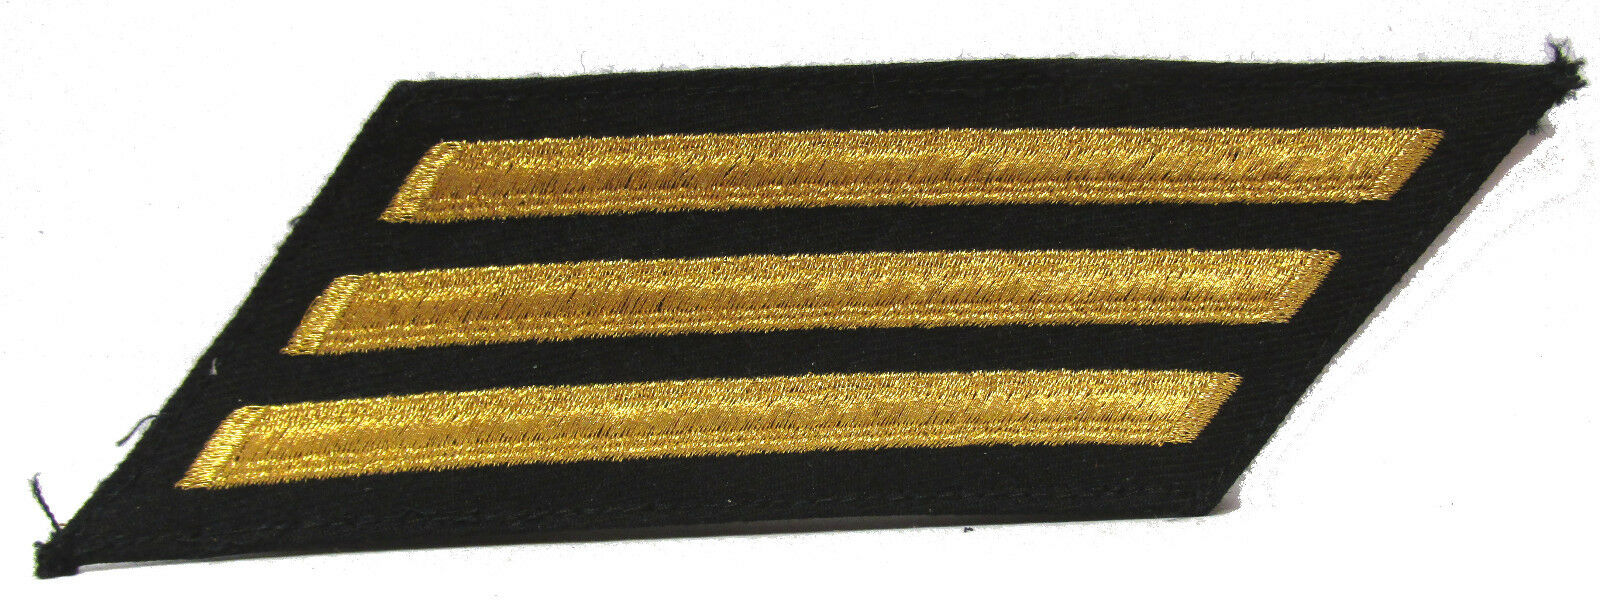 Authentic U.S. Navy Surplus Enlisted Hash Marks GOLD - Set of 3 Service Stripes